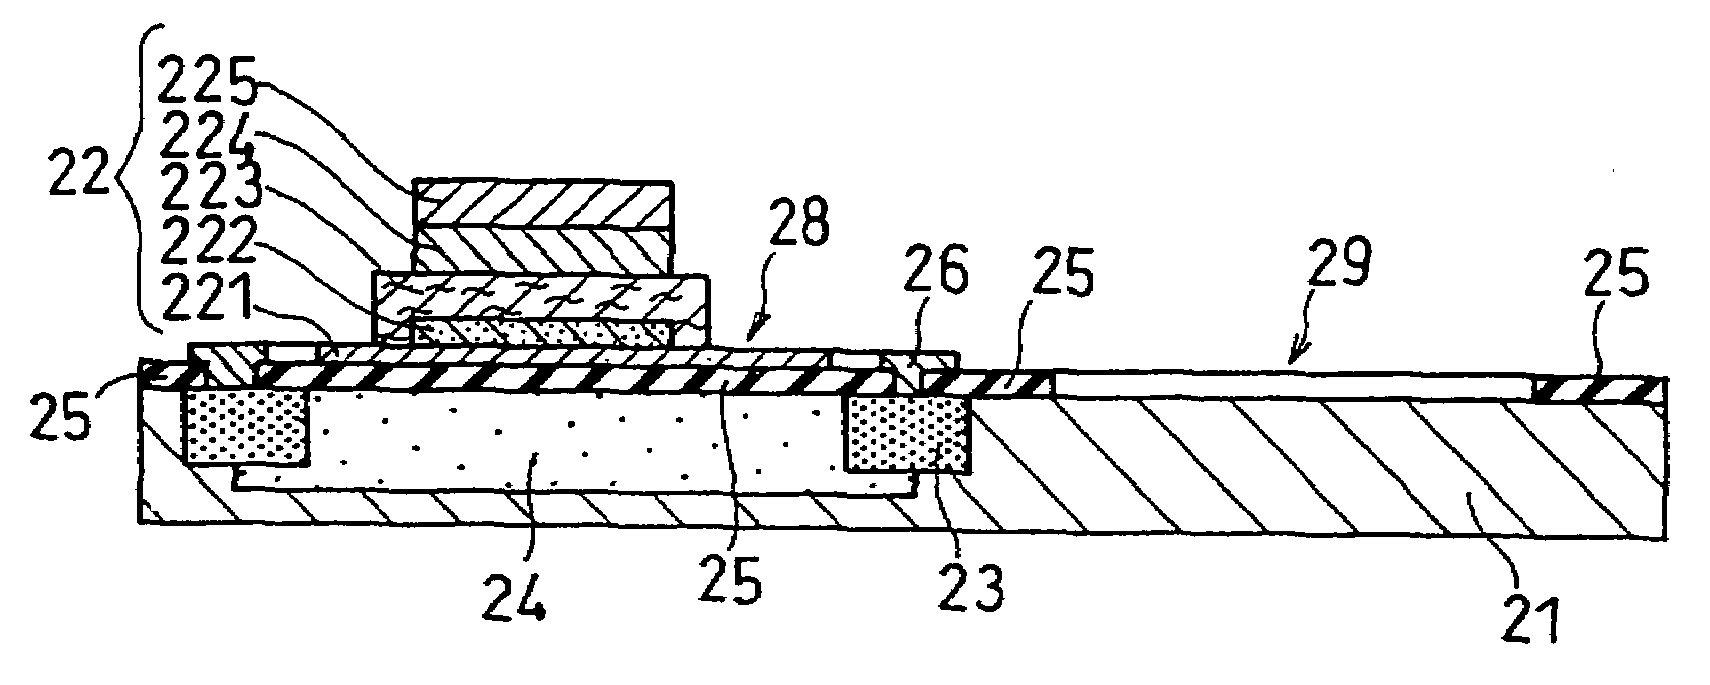 Battery mounted integrated circuit device having diffusion layers that prevent cations serving to charge and discharge battery from diffusing into the integrated circuit region